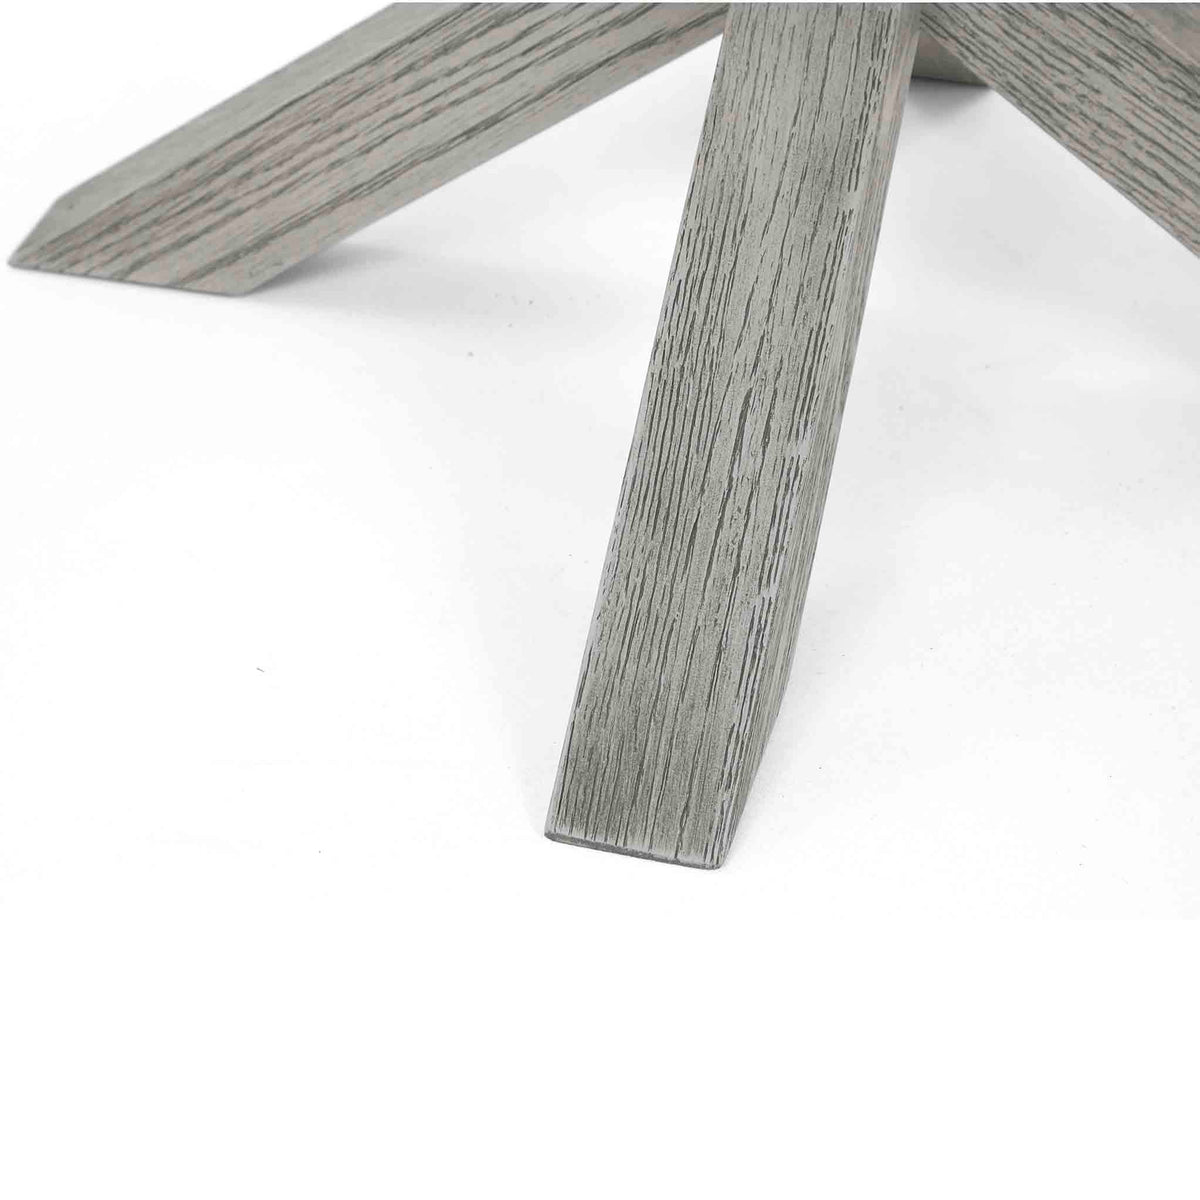 close of of the crossed solid wood legs on the Epsome Round Coffee Table